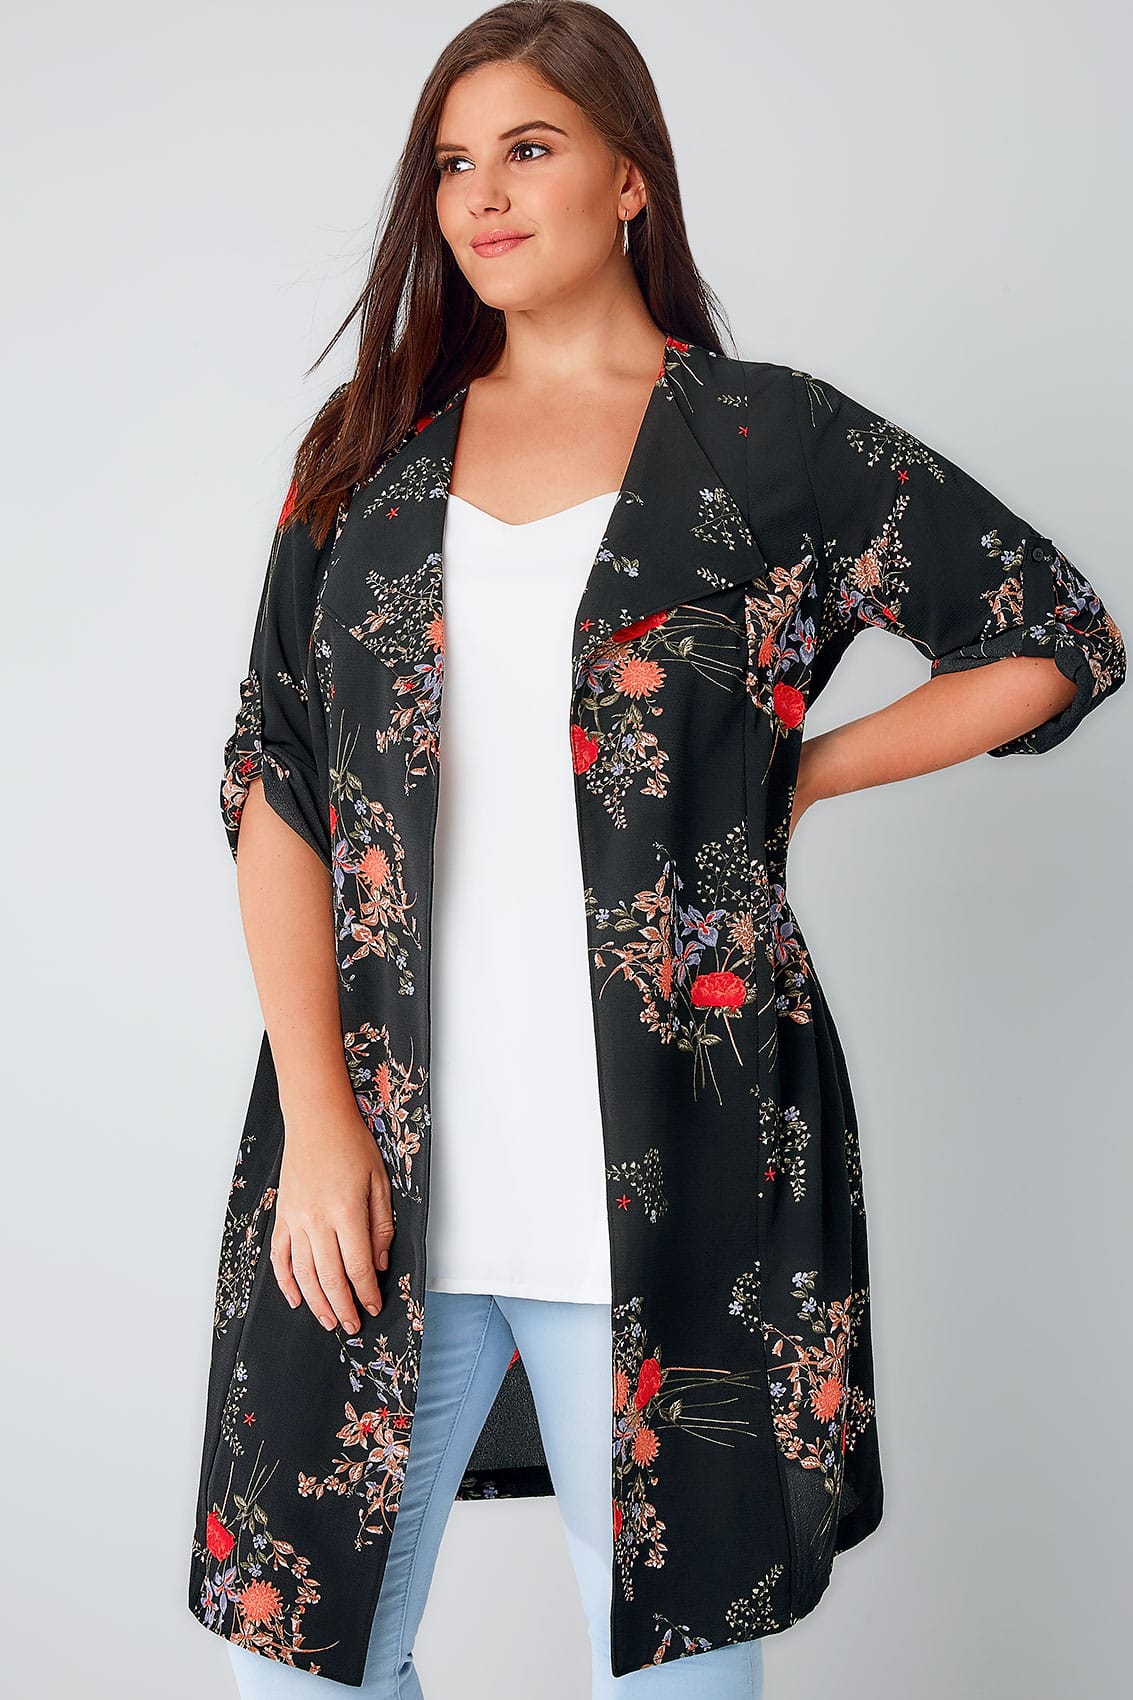 Black & Multi Floral Print Waterfall Duster Jacket, Plus size 16 to 36